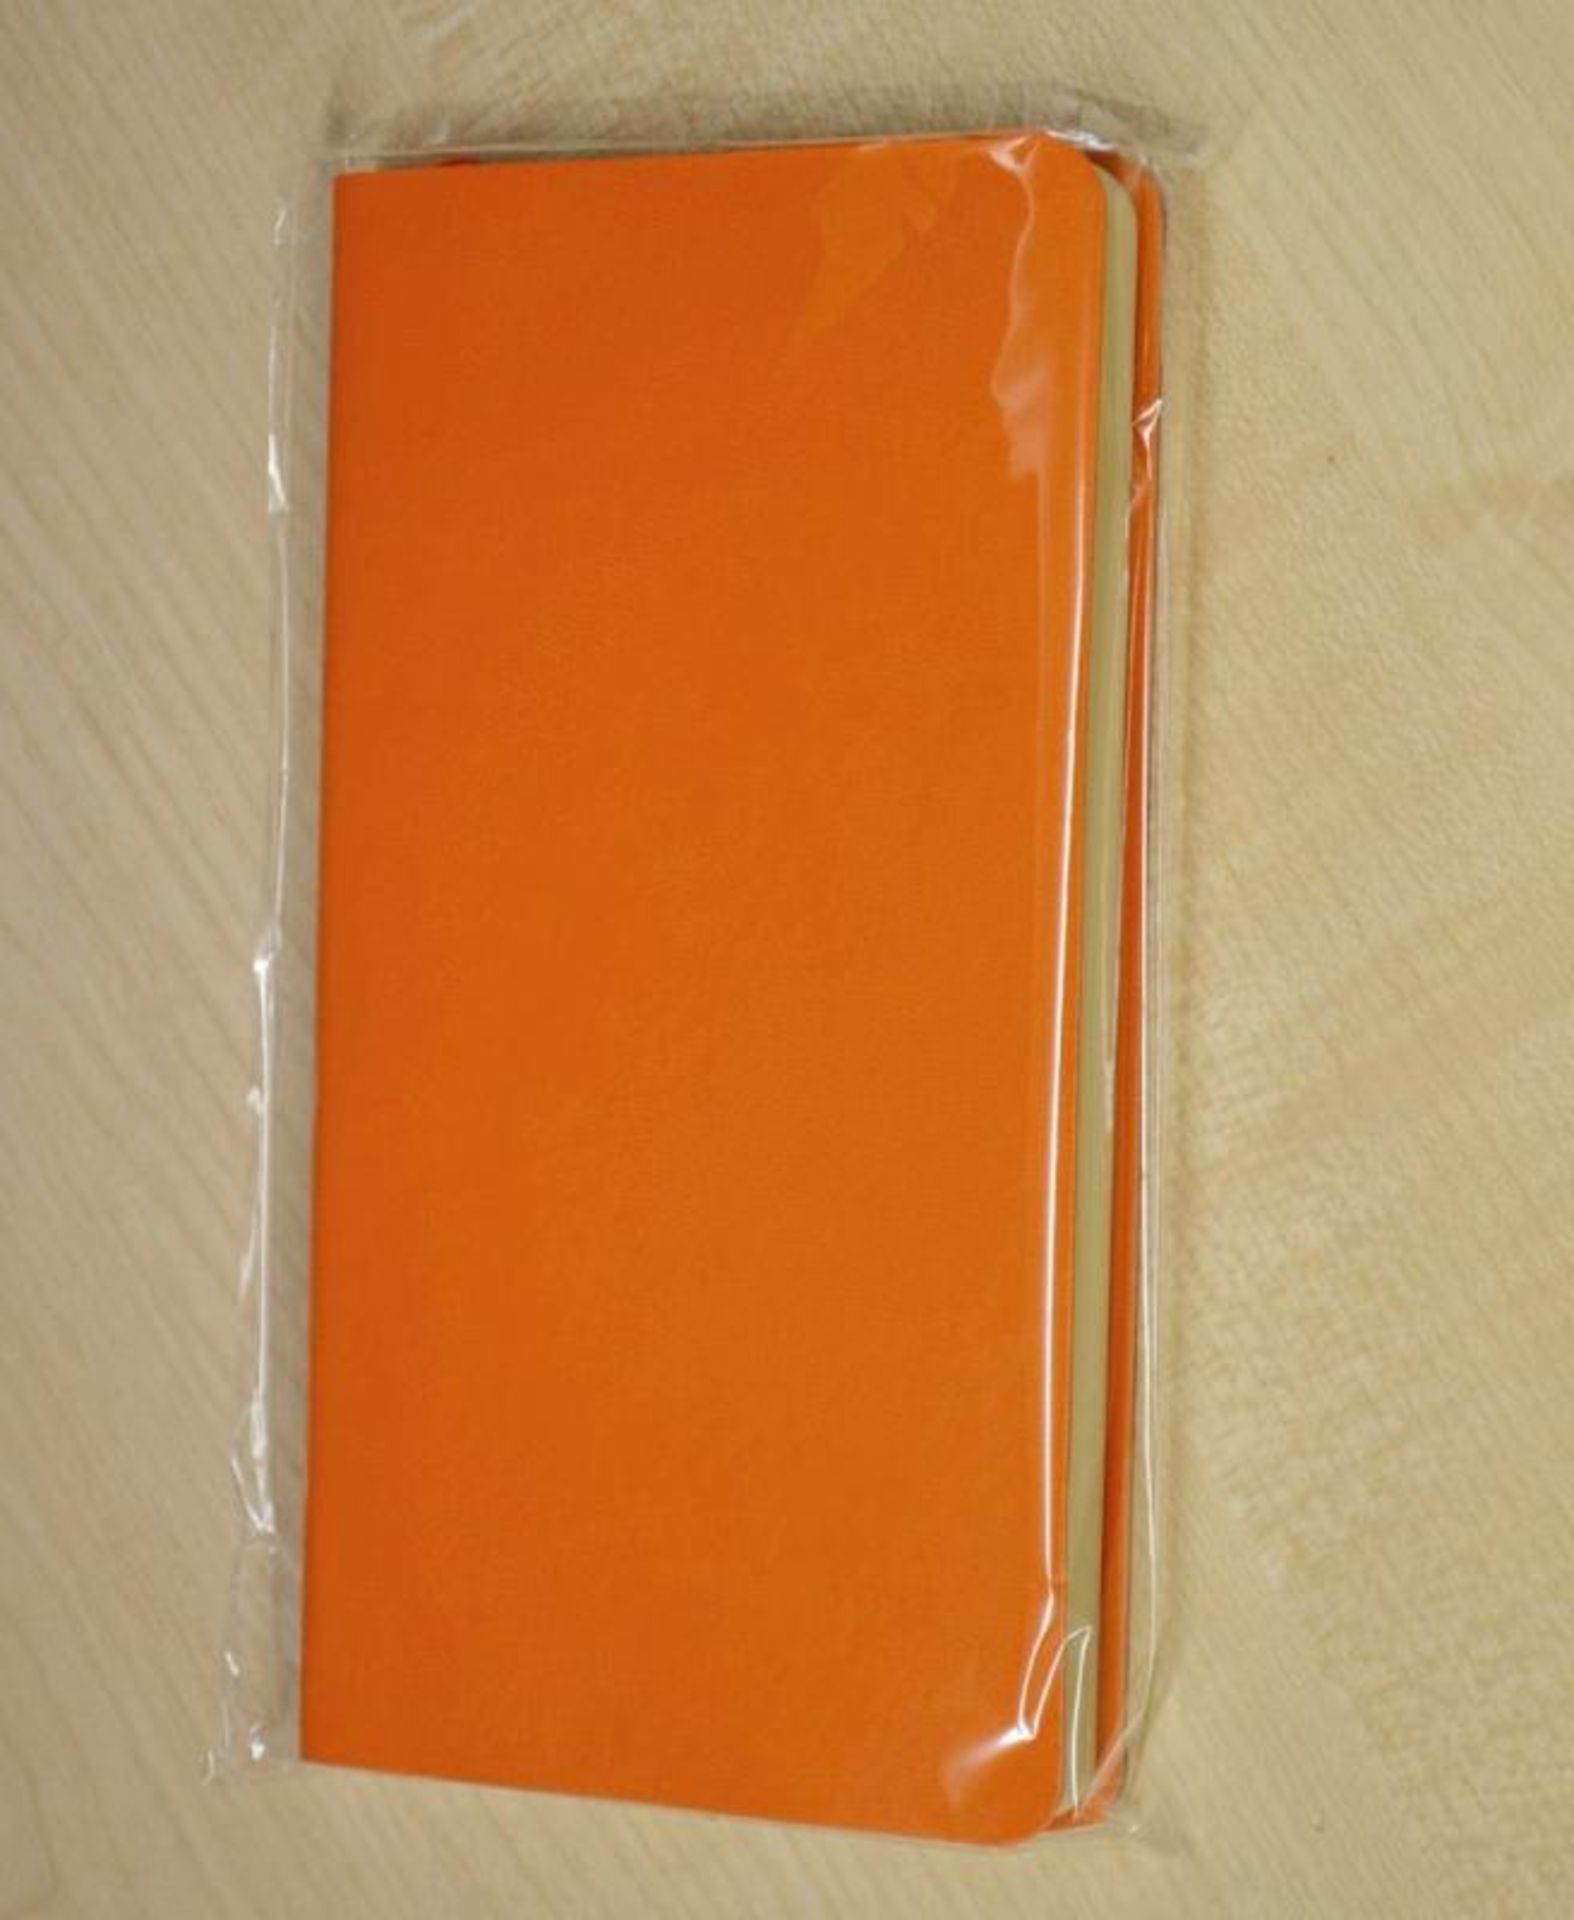 100 x ICE LONDON "Slim" Faux Leather Covered Notebooks In Bright Orange - New & Boxed Stock - Image 3 of 3